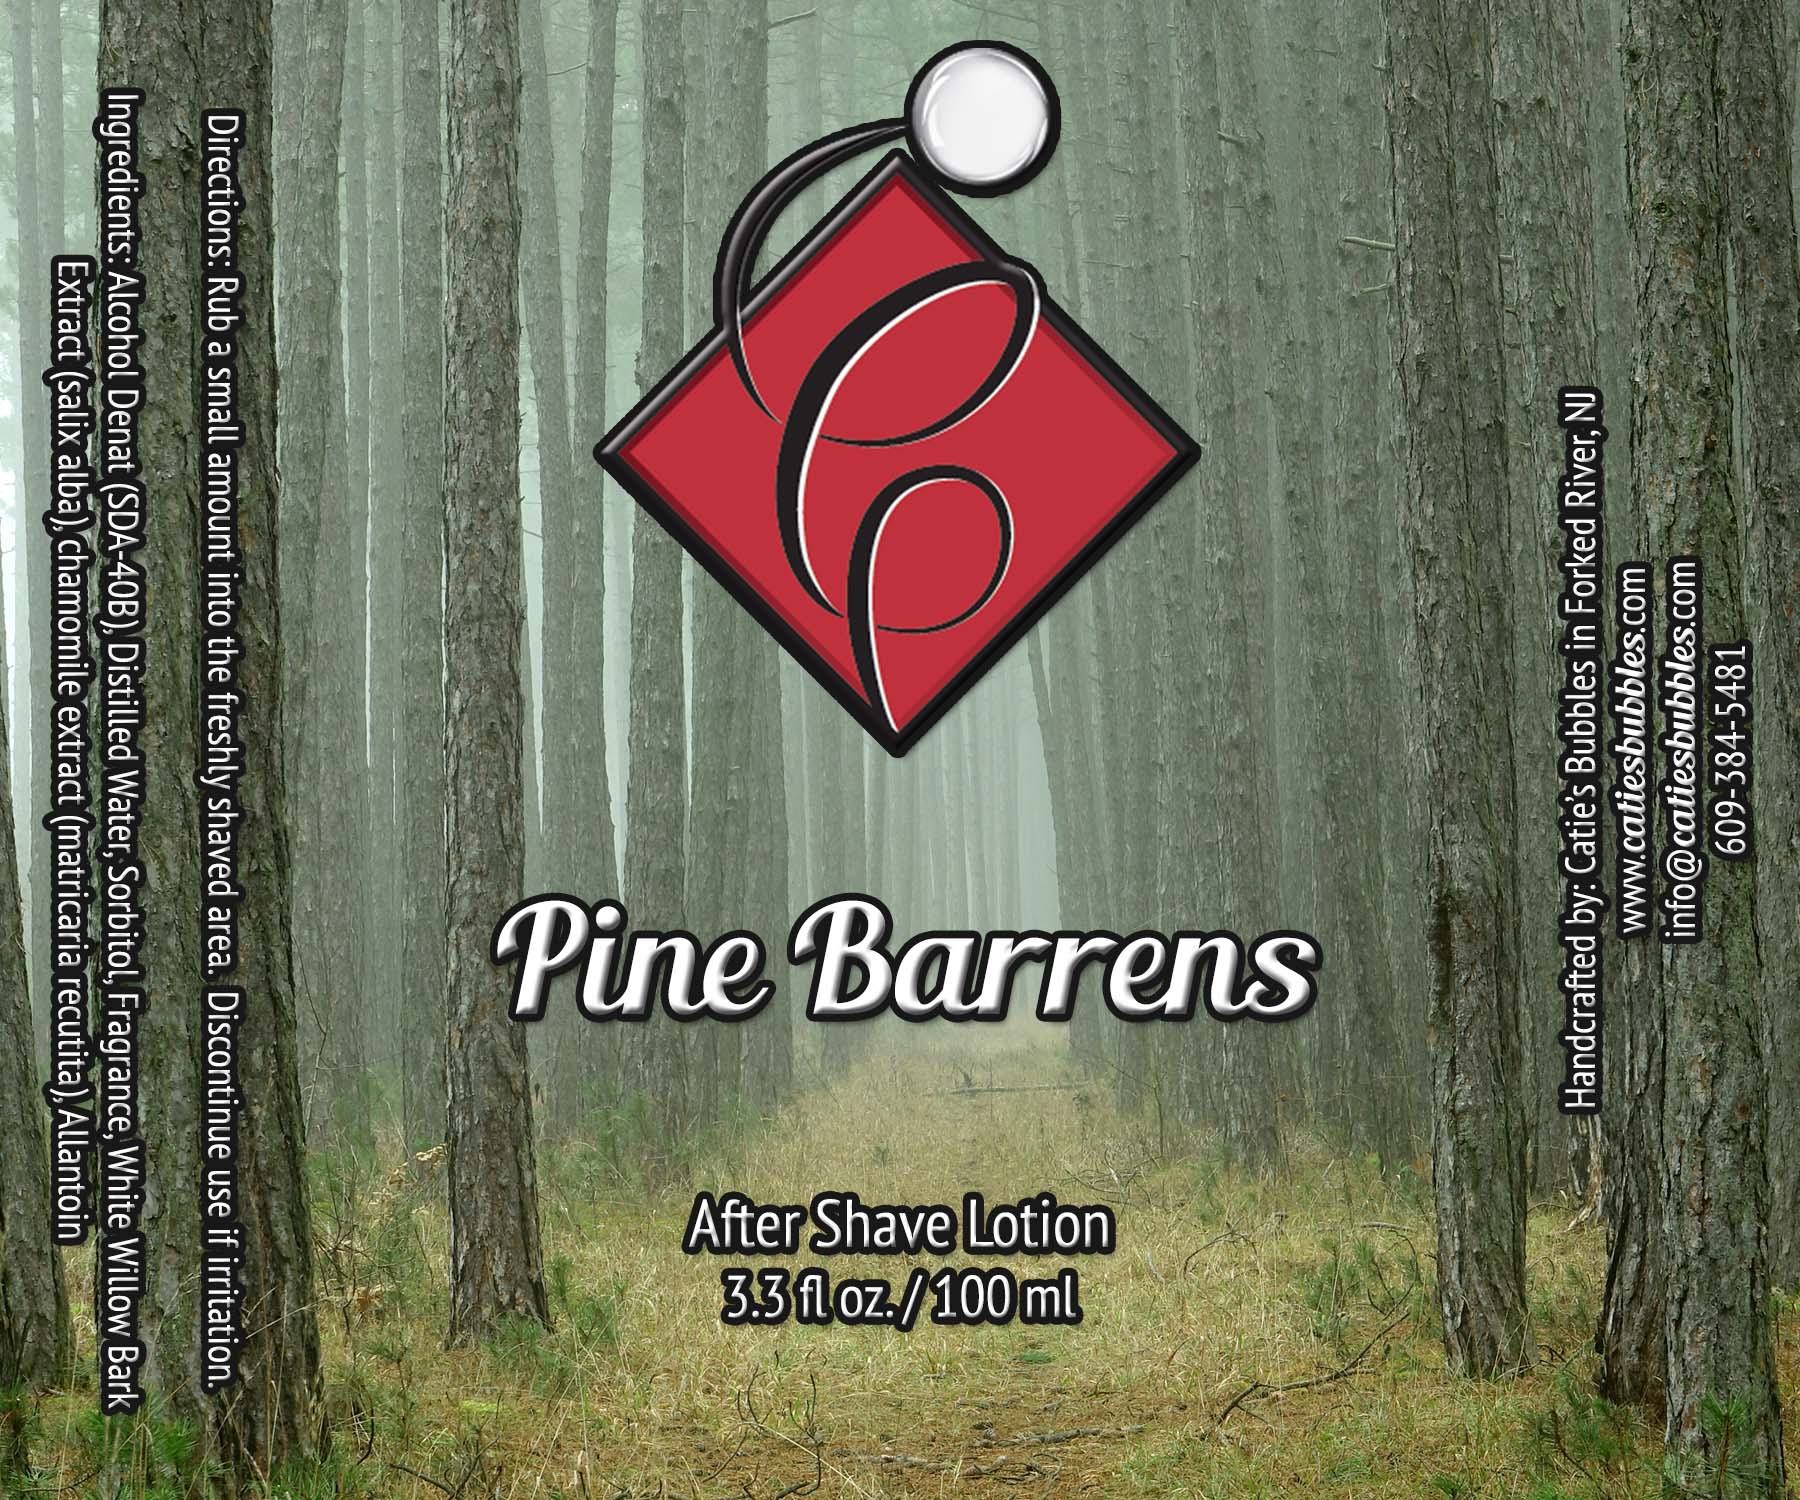 Pine Barrens After Shave Lotion - Click Image to Close